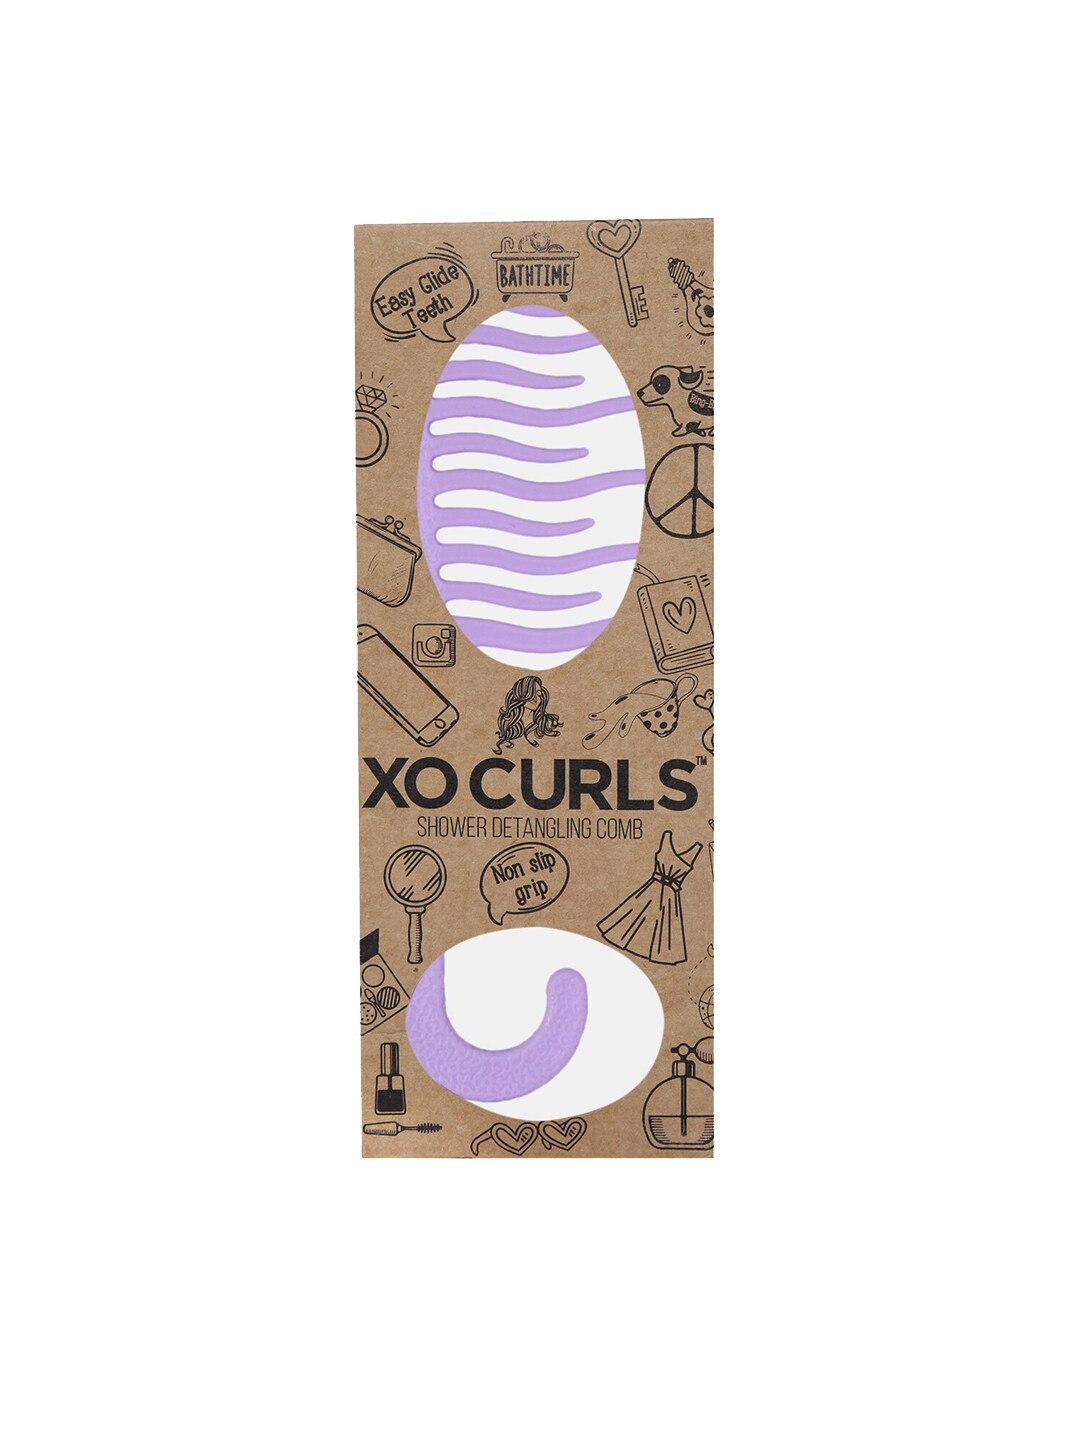 XO CURLS Lavender Shower Detangling Comb Price in India